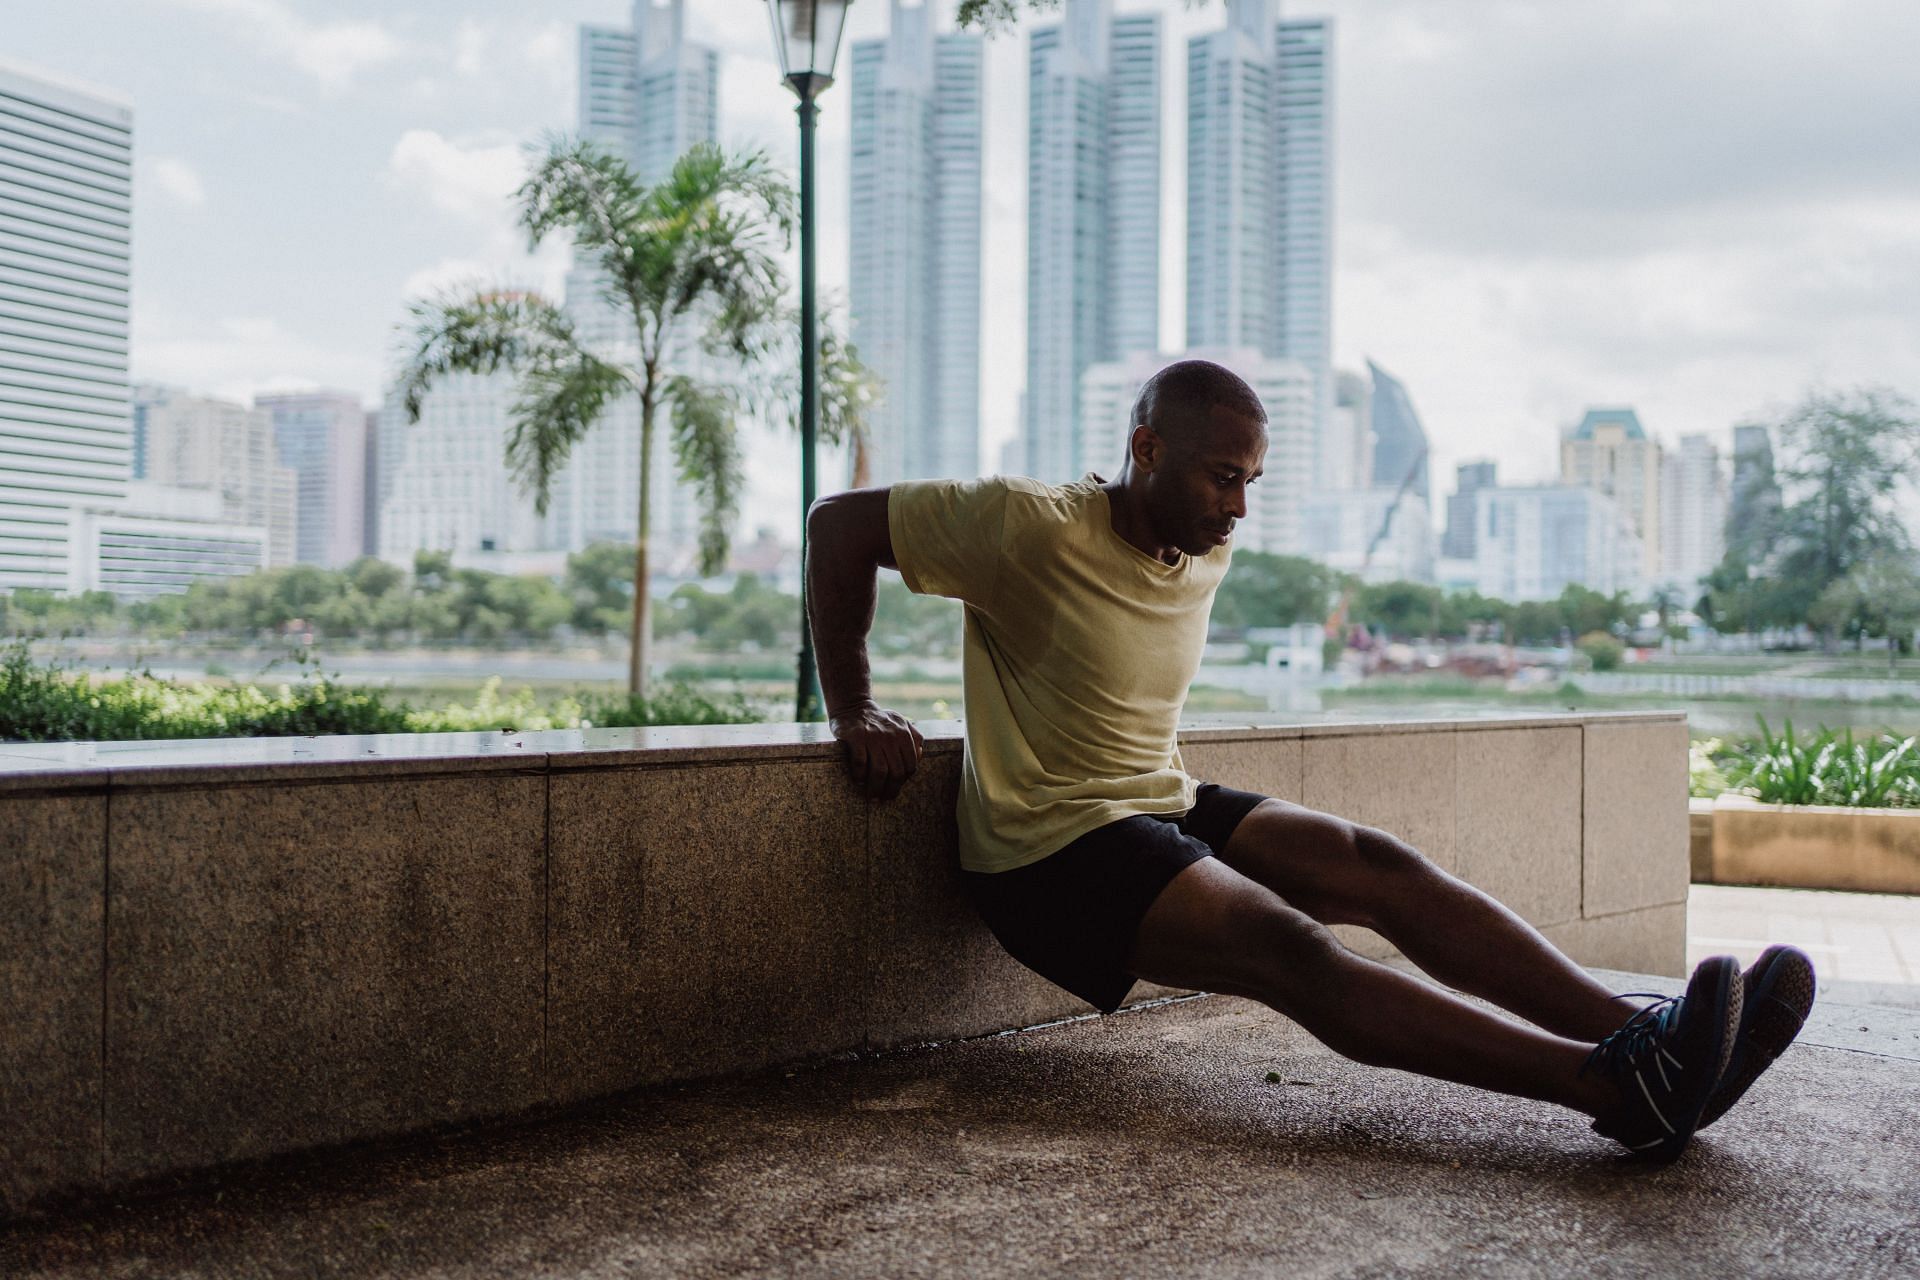 Tricep dips are an easy and adaptable exercise that you can do anywhere. (Image via Pexels/Ketut Subiyanto)